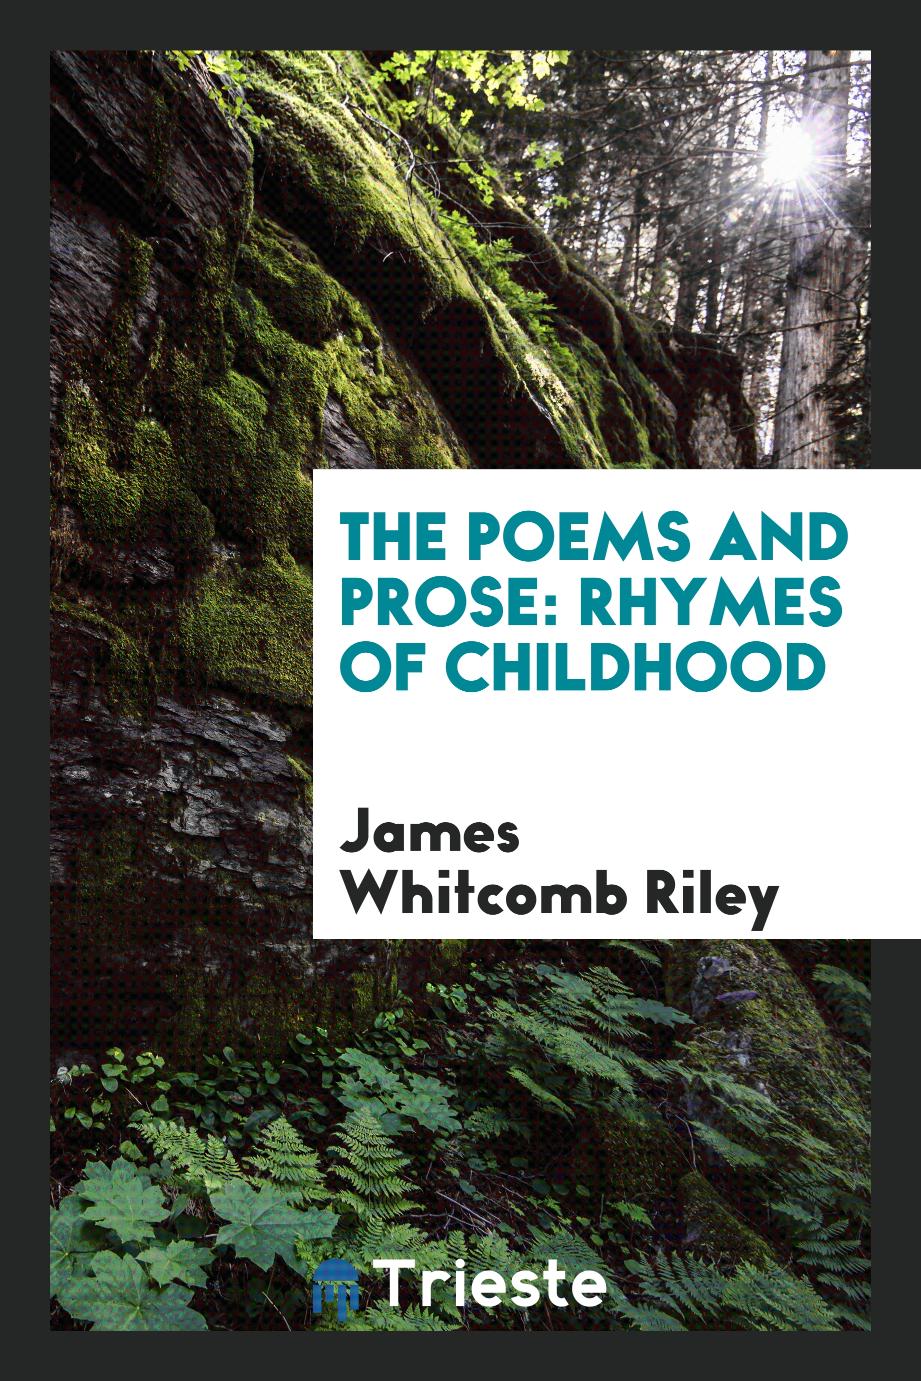 The poems and prose: Rhymes of childhood